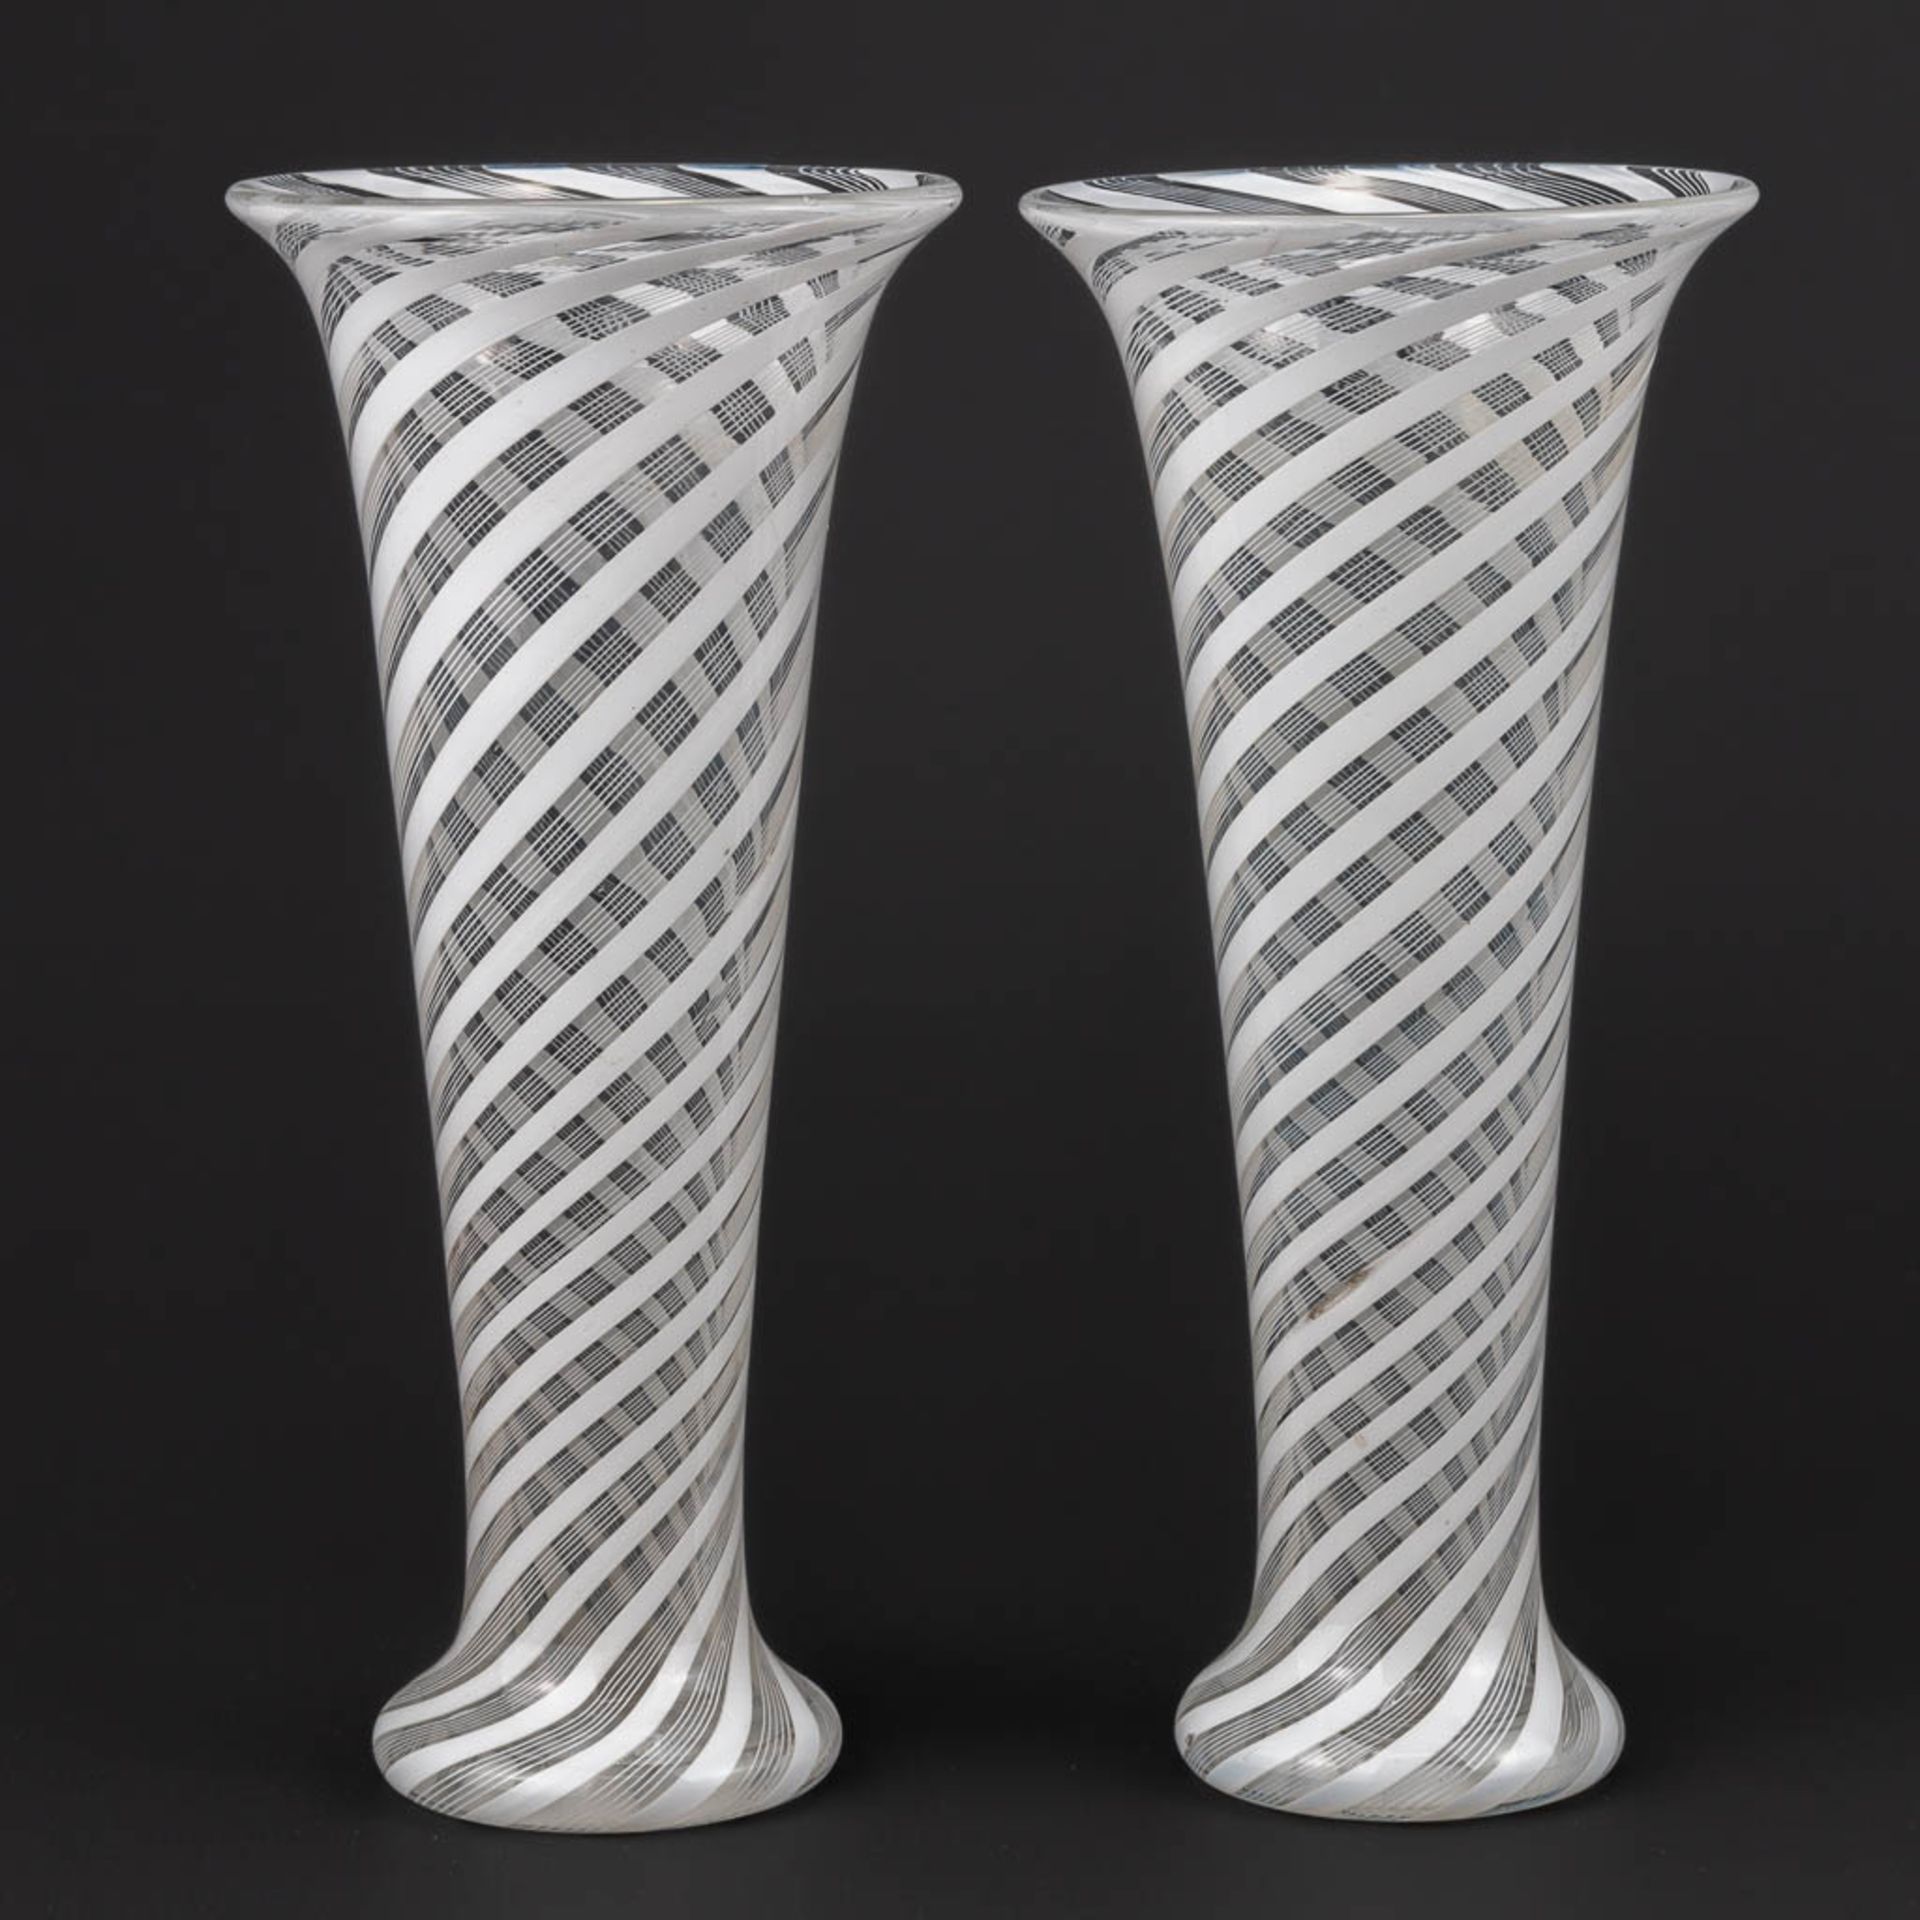 A pair of vases made of glass in Murano, Italy, around 1900. (16 x 7 cm) - Image 5 of 11